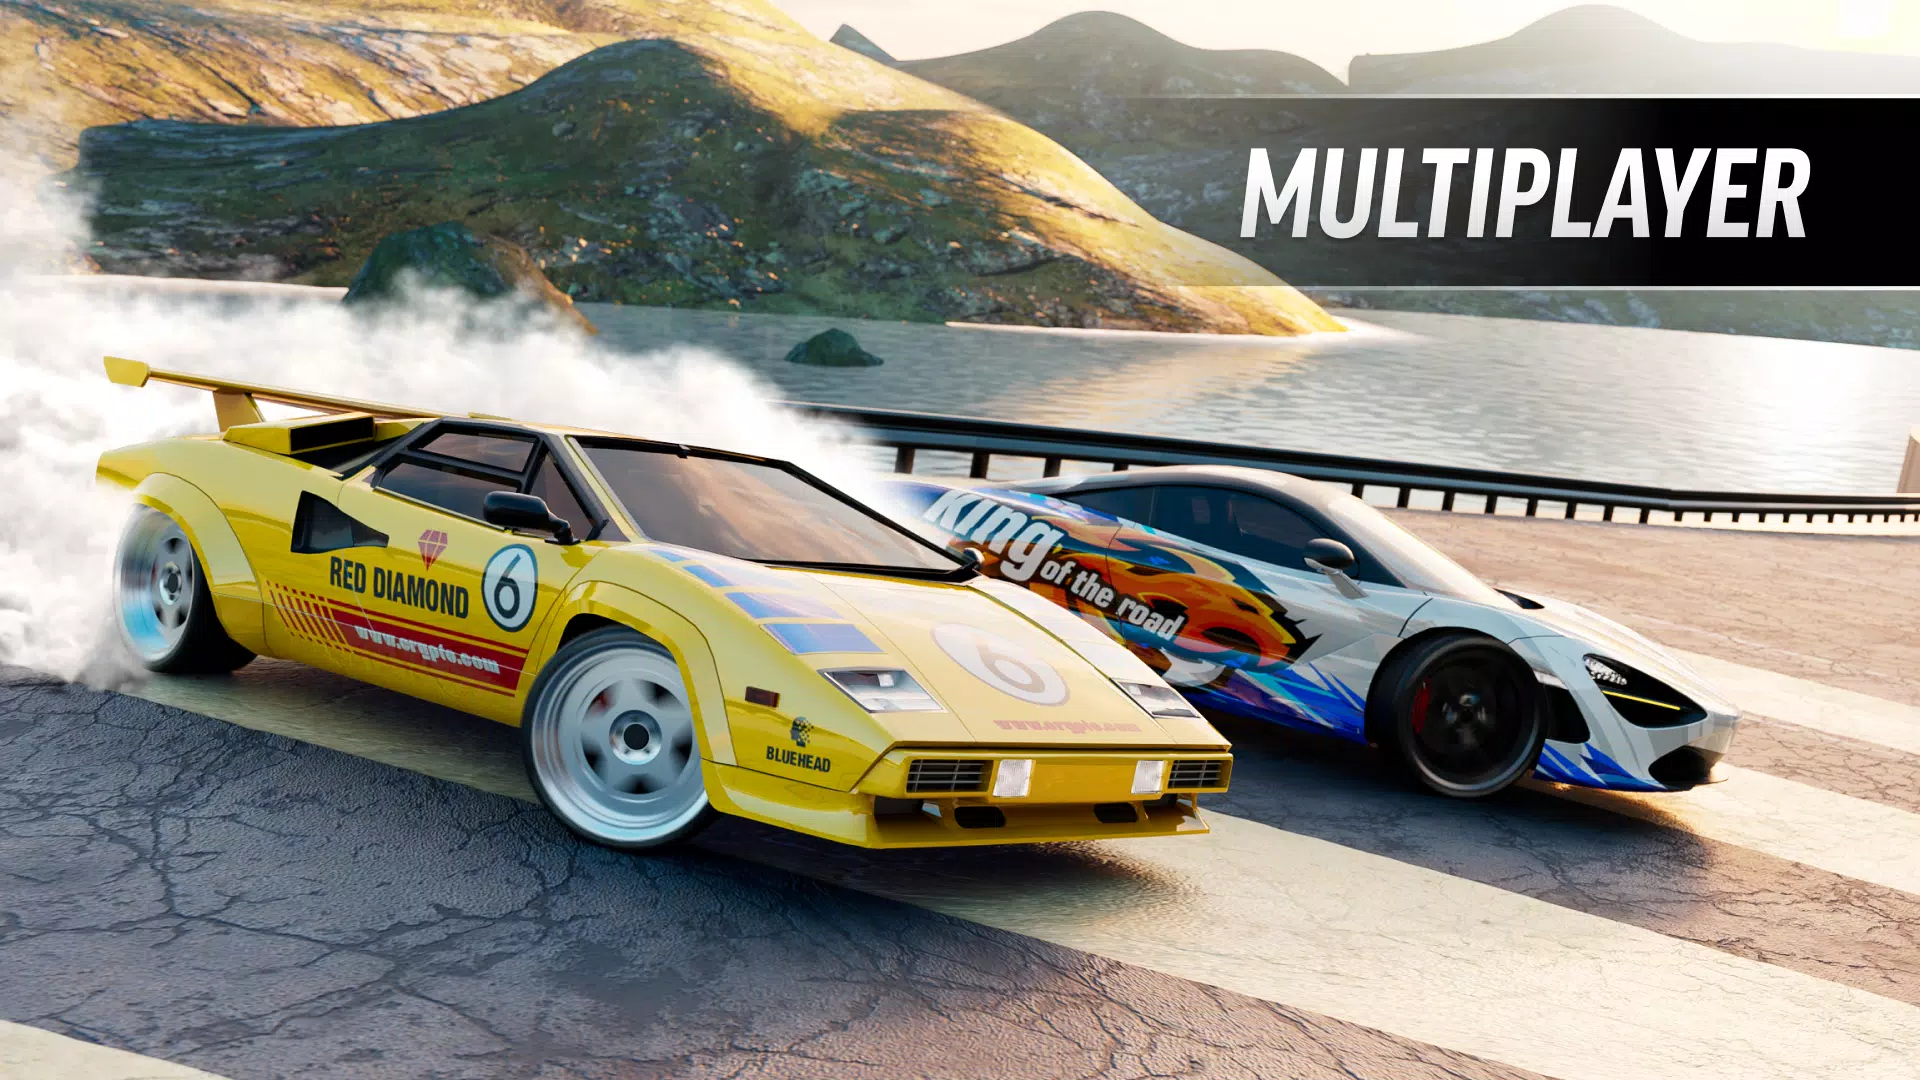 Download Drift Max Pro MOD cash/gold 2.5.42 APK free for android, last  version. Comments, ratings